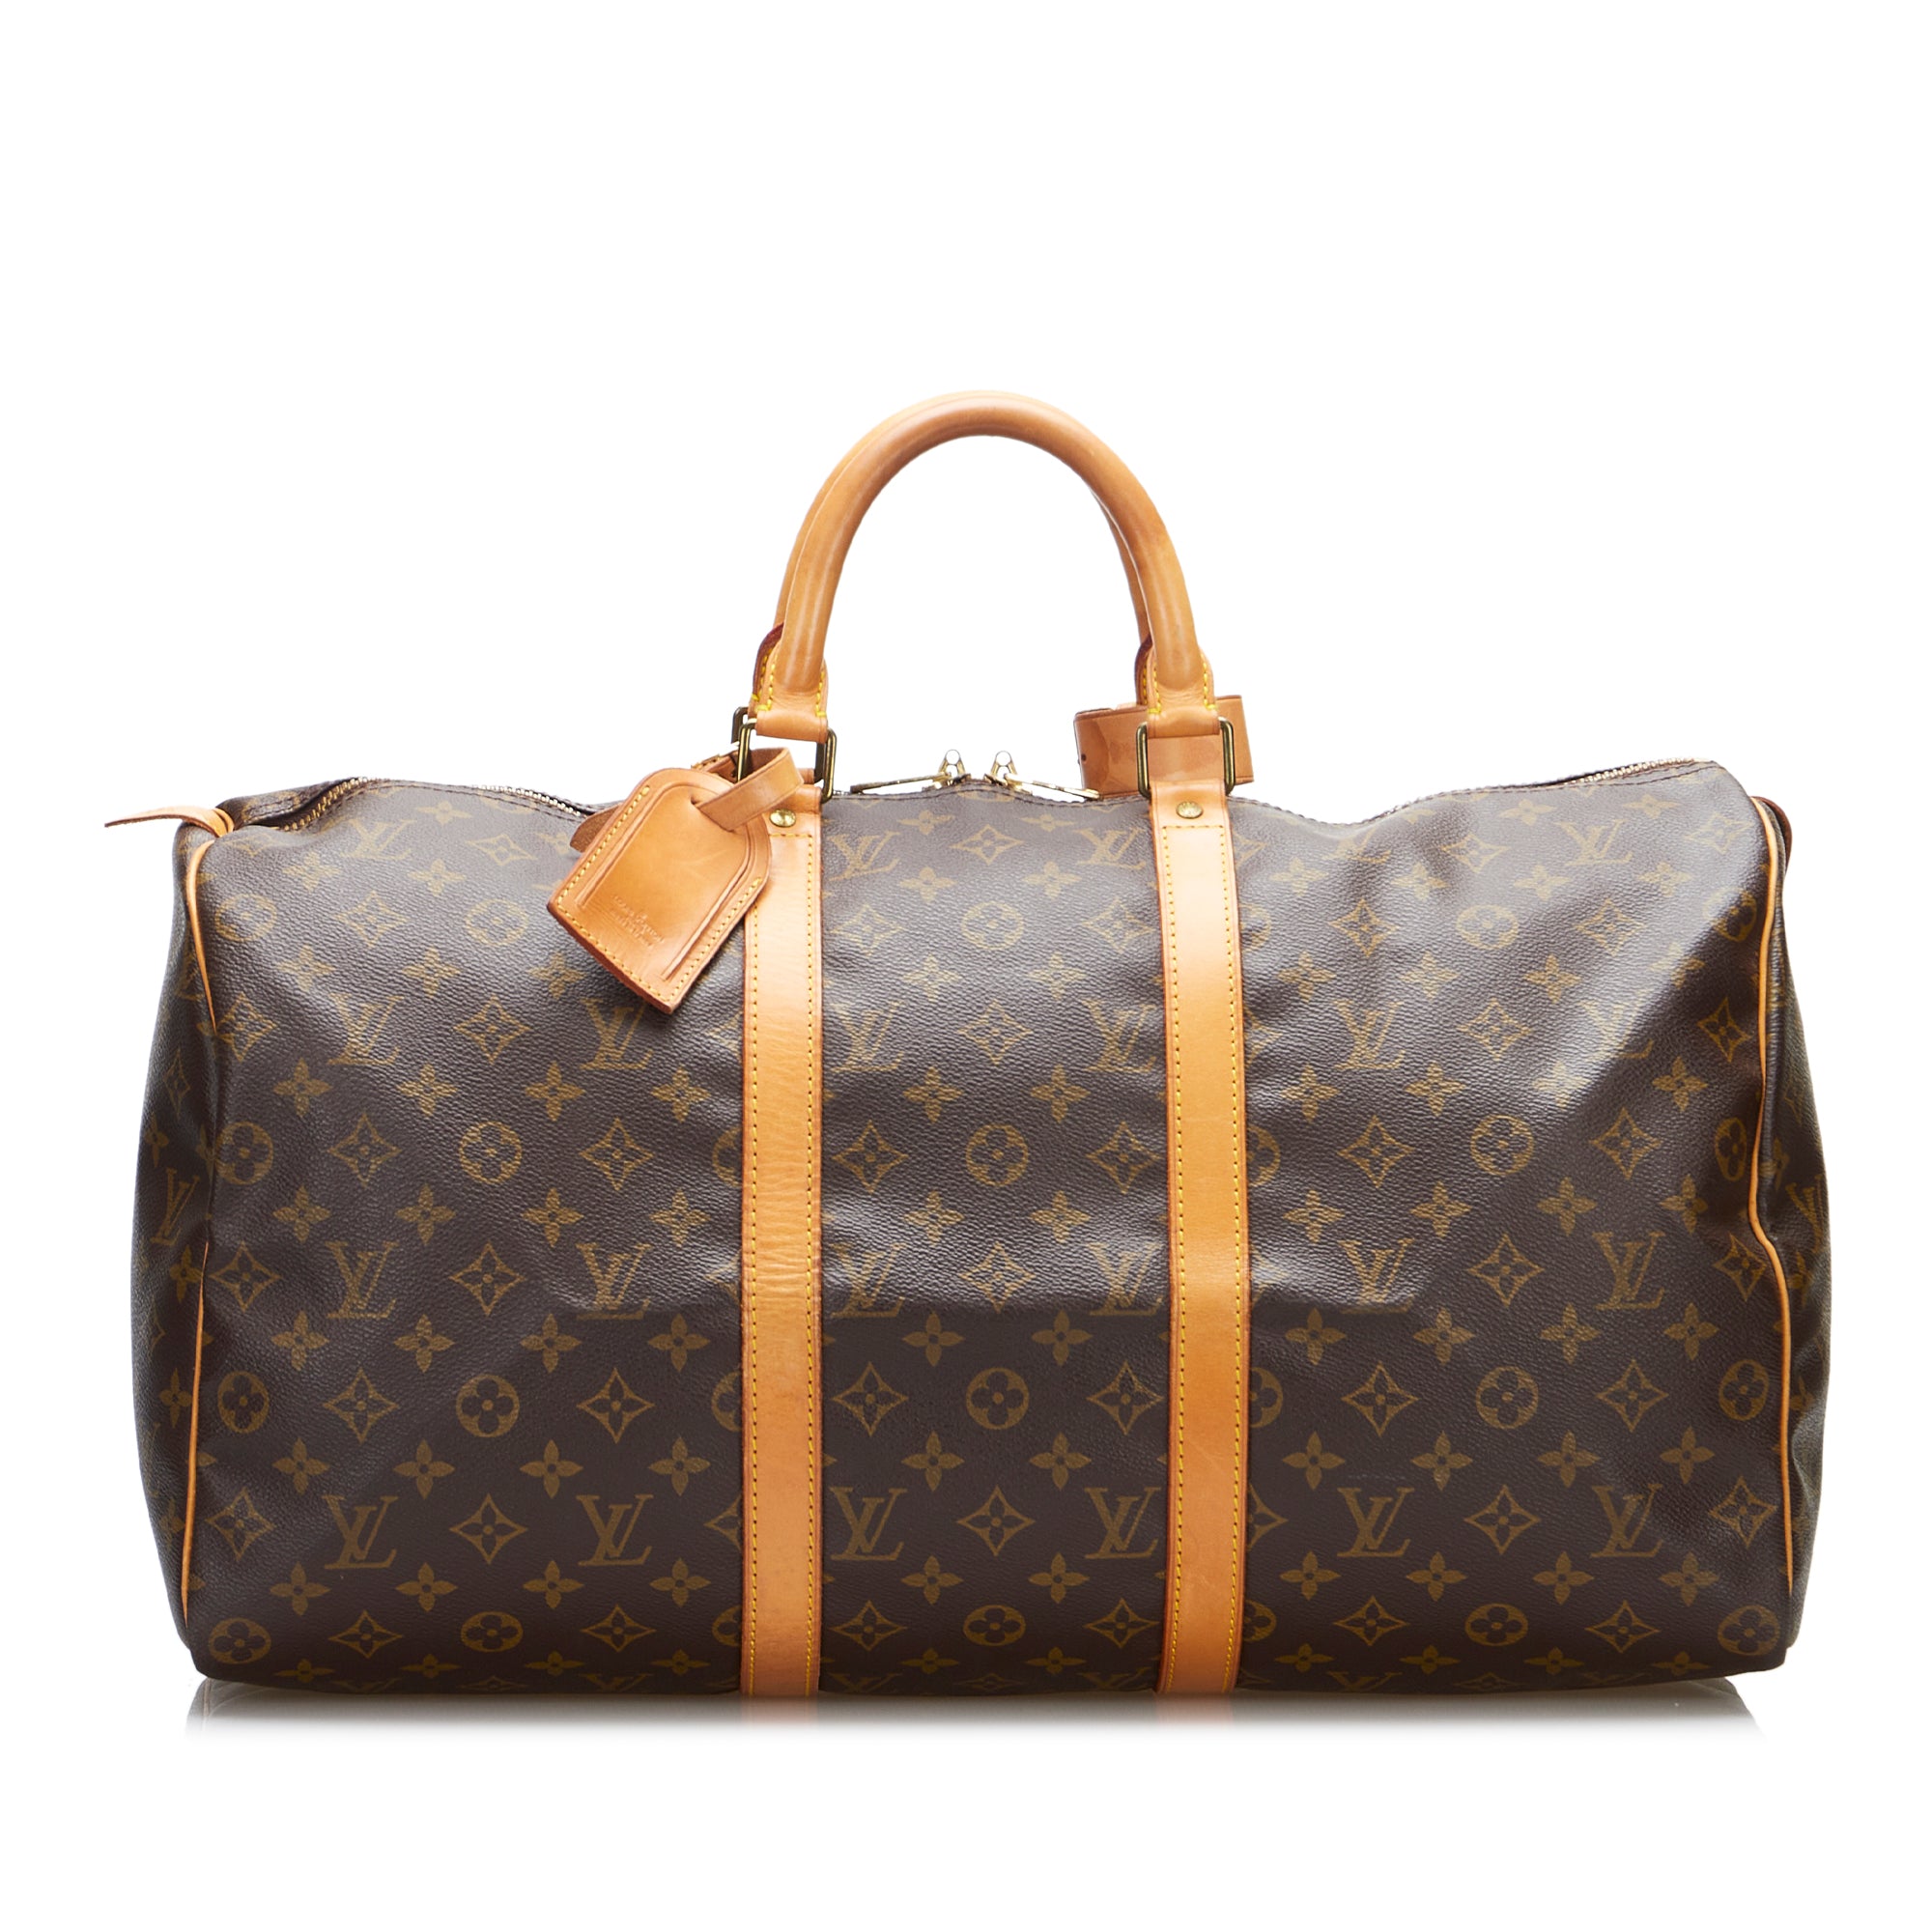 Louis Vuitton Luggage  What fits inside the Horizon 55 & Keepall